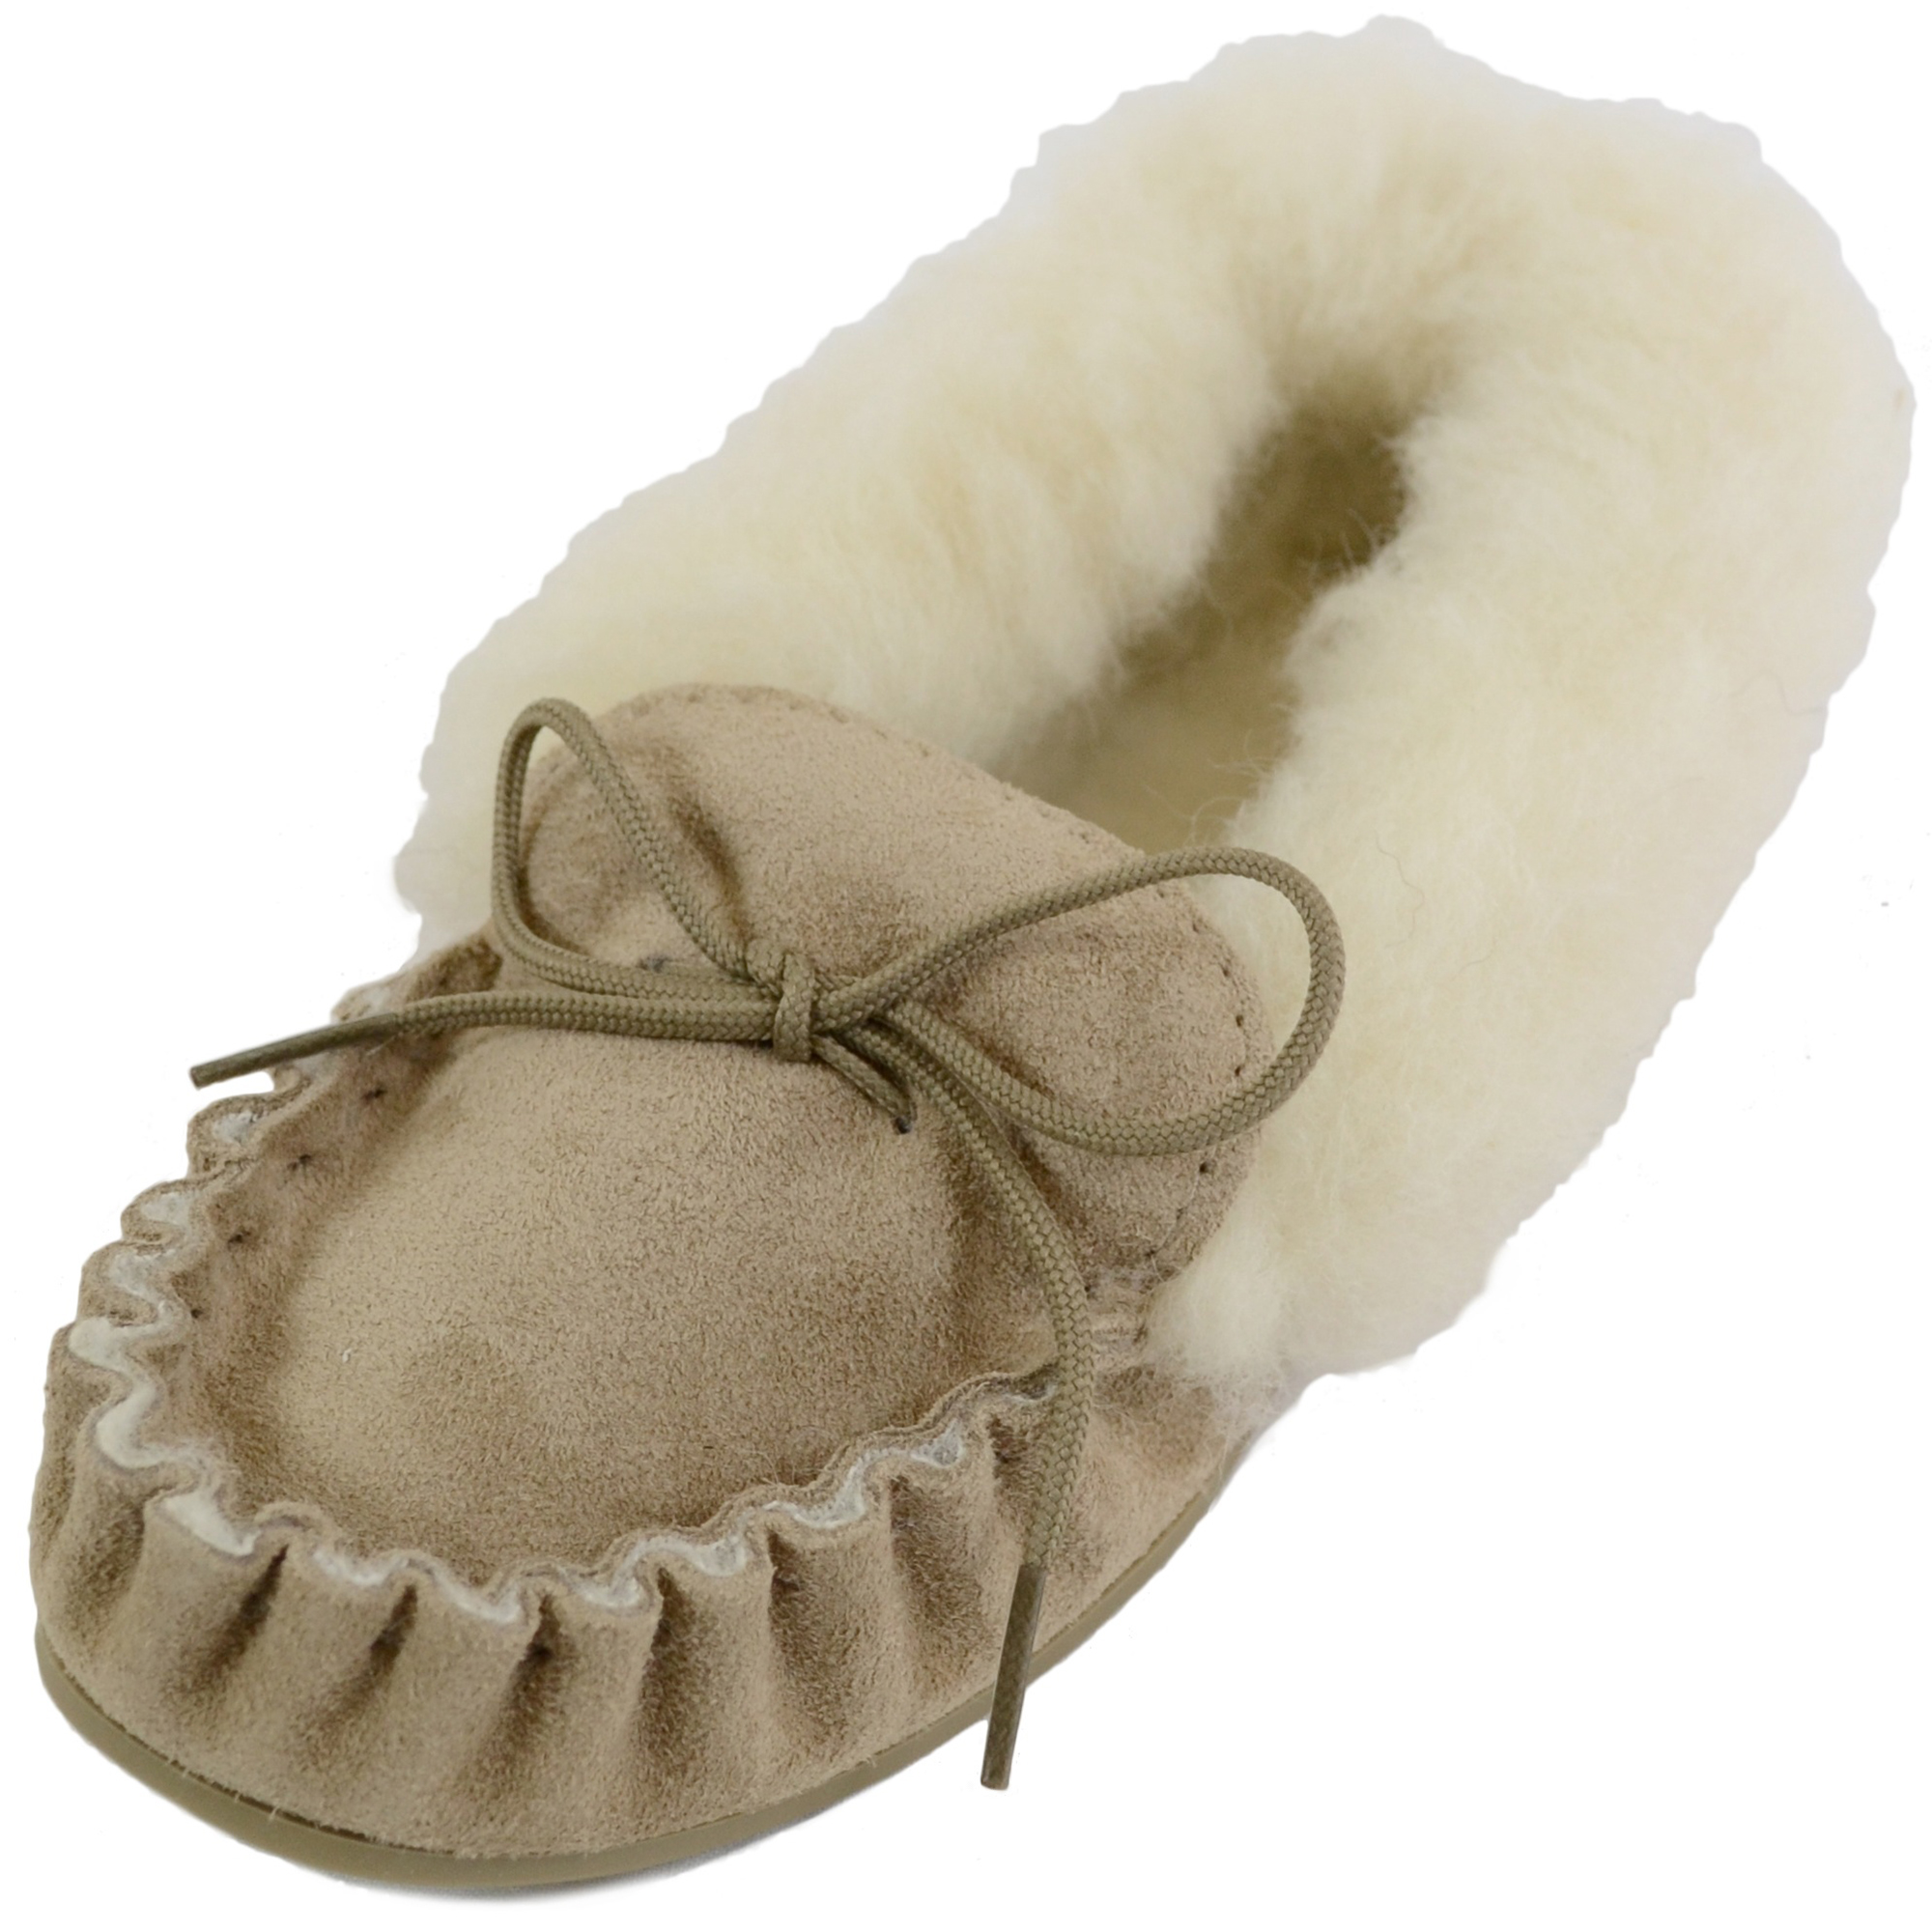 Snugrugs - Ladies Wool Lined Moccasins with Cuff - Beige